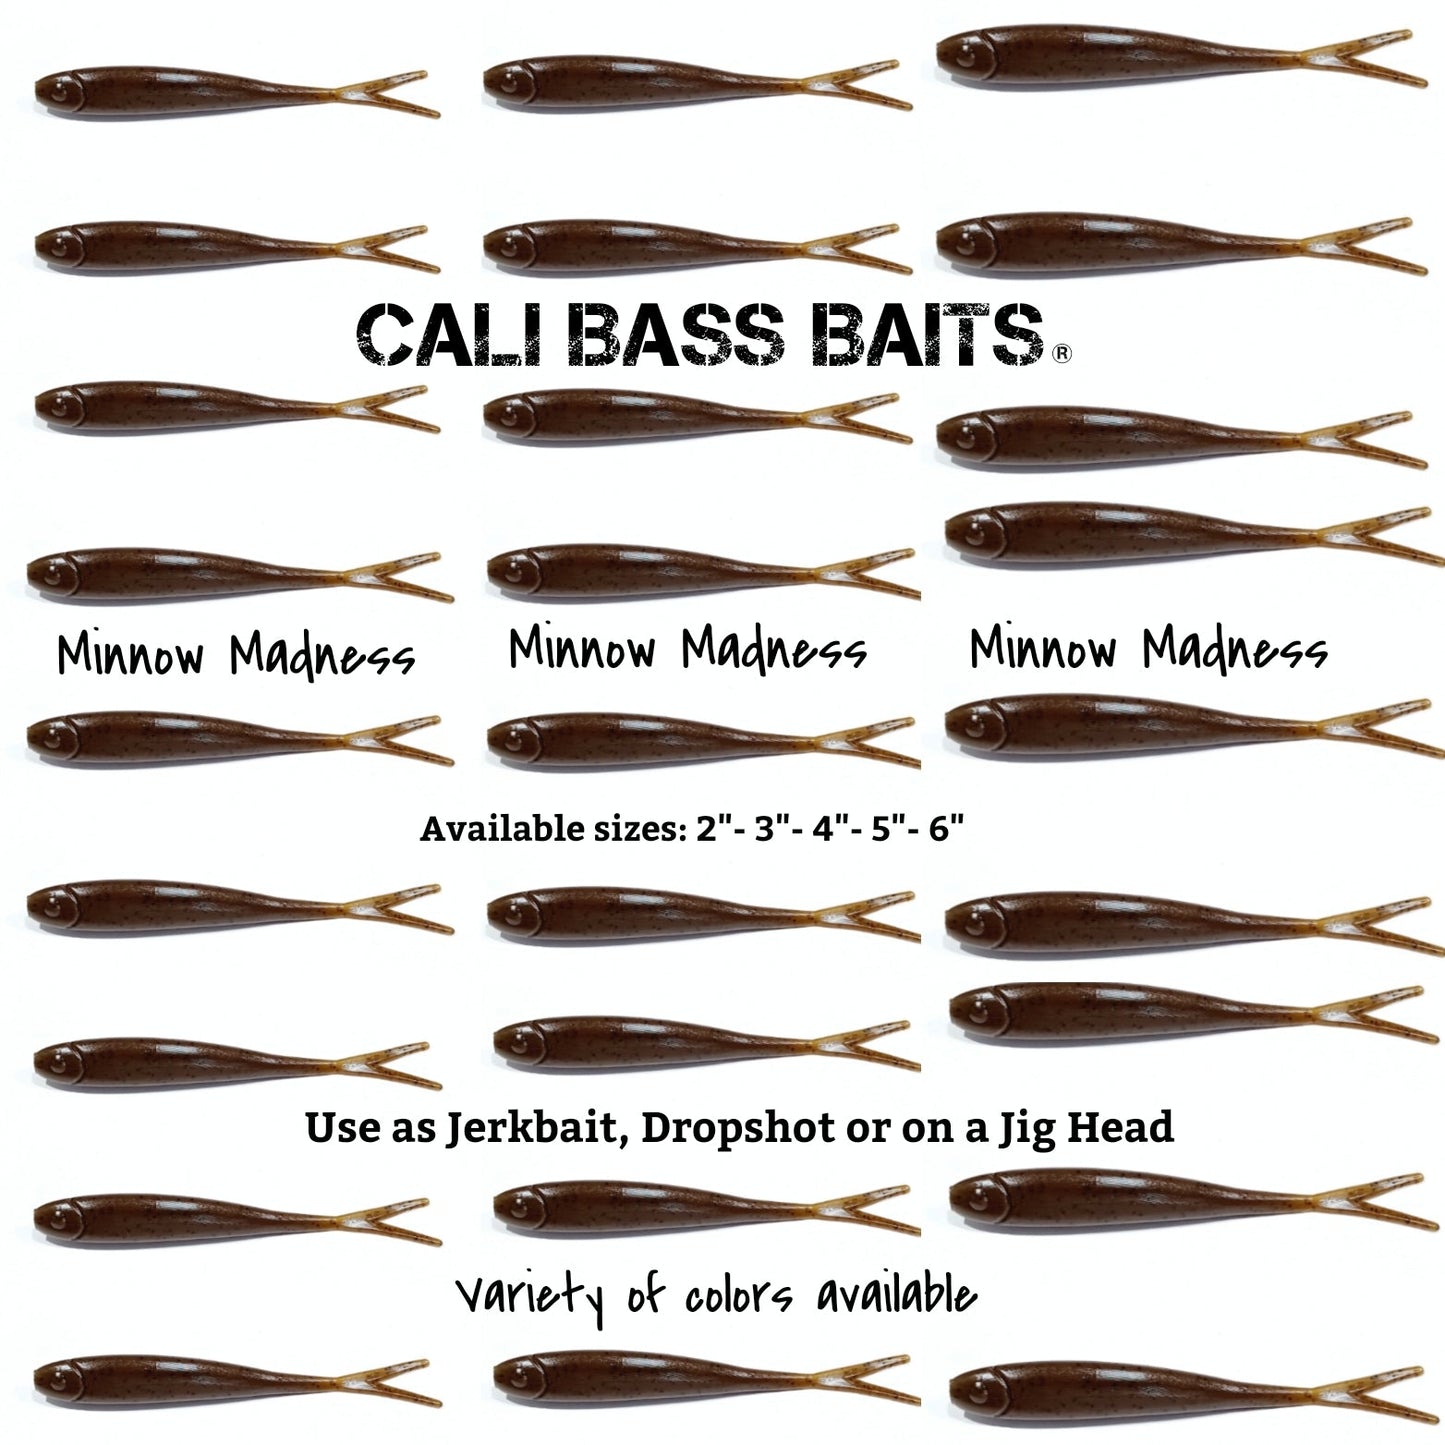 New! Minnow Madness (SIZE 5" inch bait) Great for Dropshot, Jerkbait and Swimbait set ups